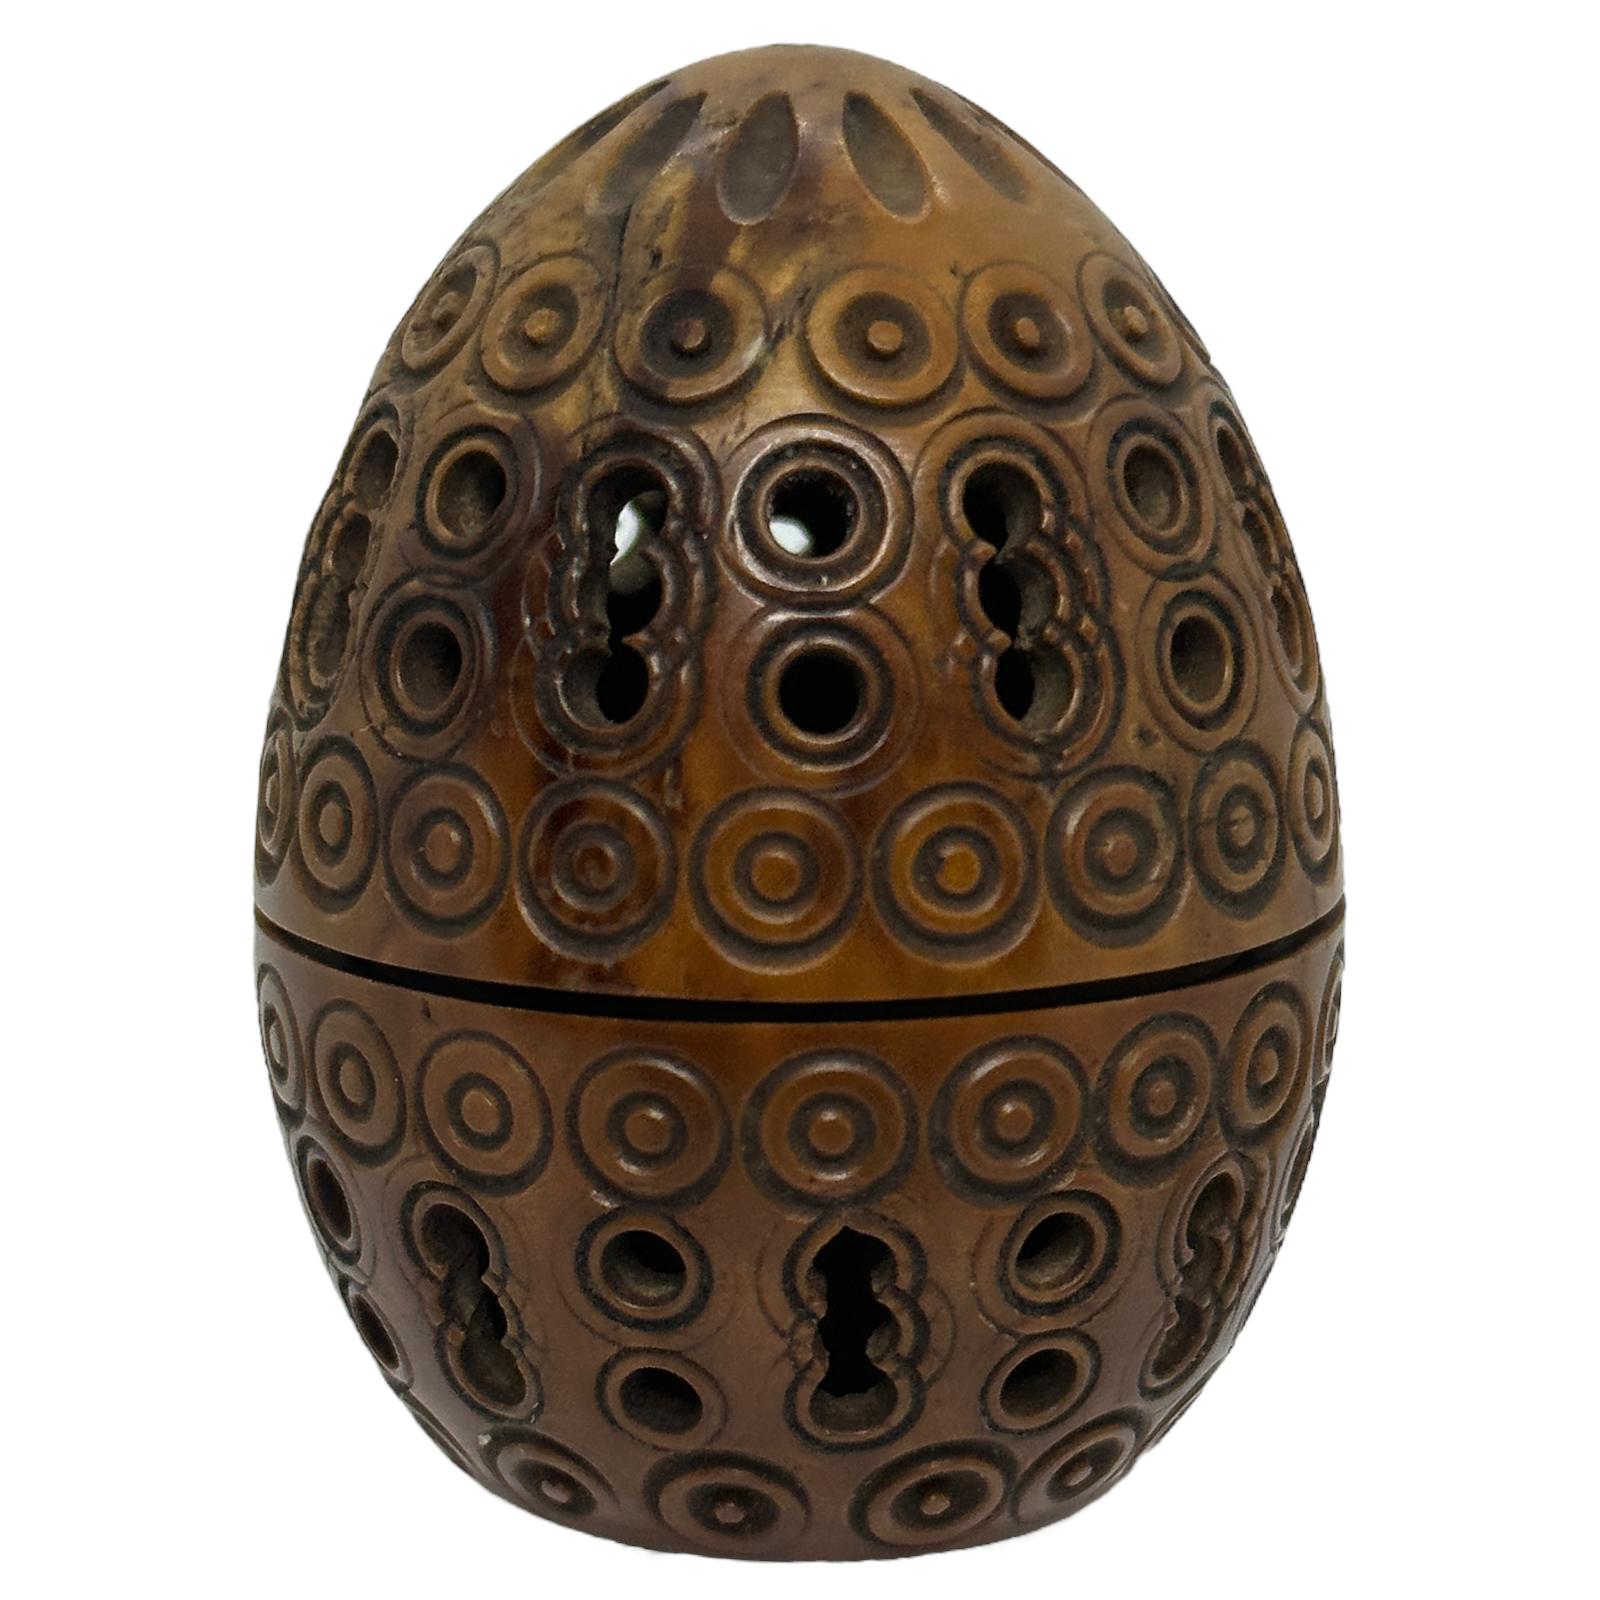 A beautiful hand carved coquille nut egg box. Beautiful carving, great patina, unscrews at center to open.
The original use was a flea trap, things were different in the old days and pesticides were not available.
So some stuff just flourished,